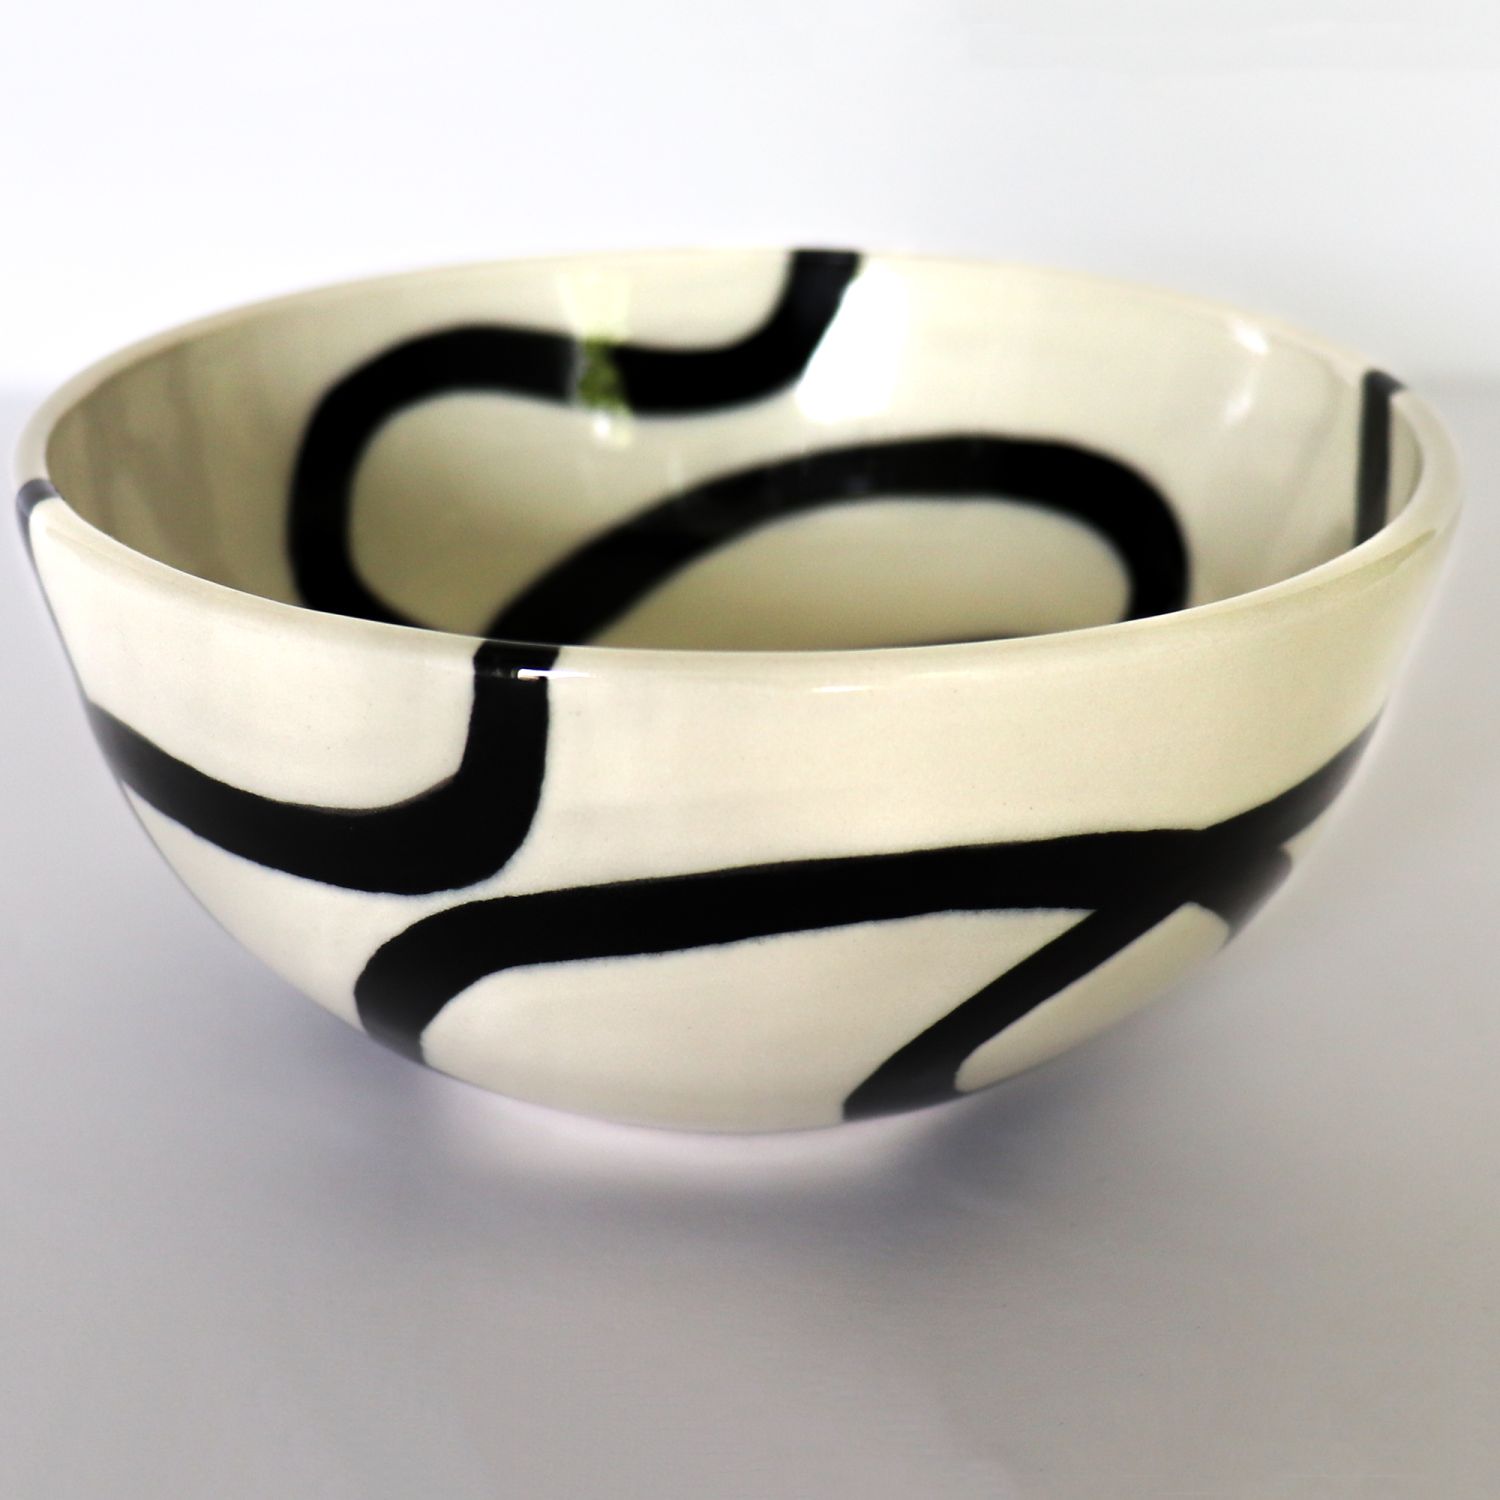 Alana Marcoccia: Interconnected Bowl – Large Product Image 1 of 5